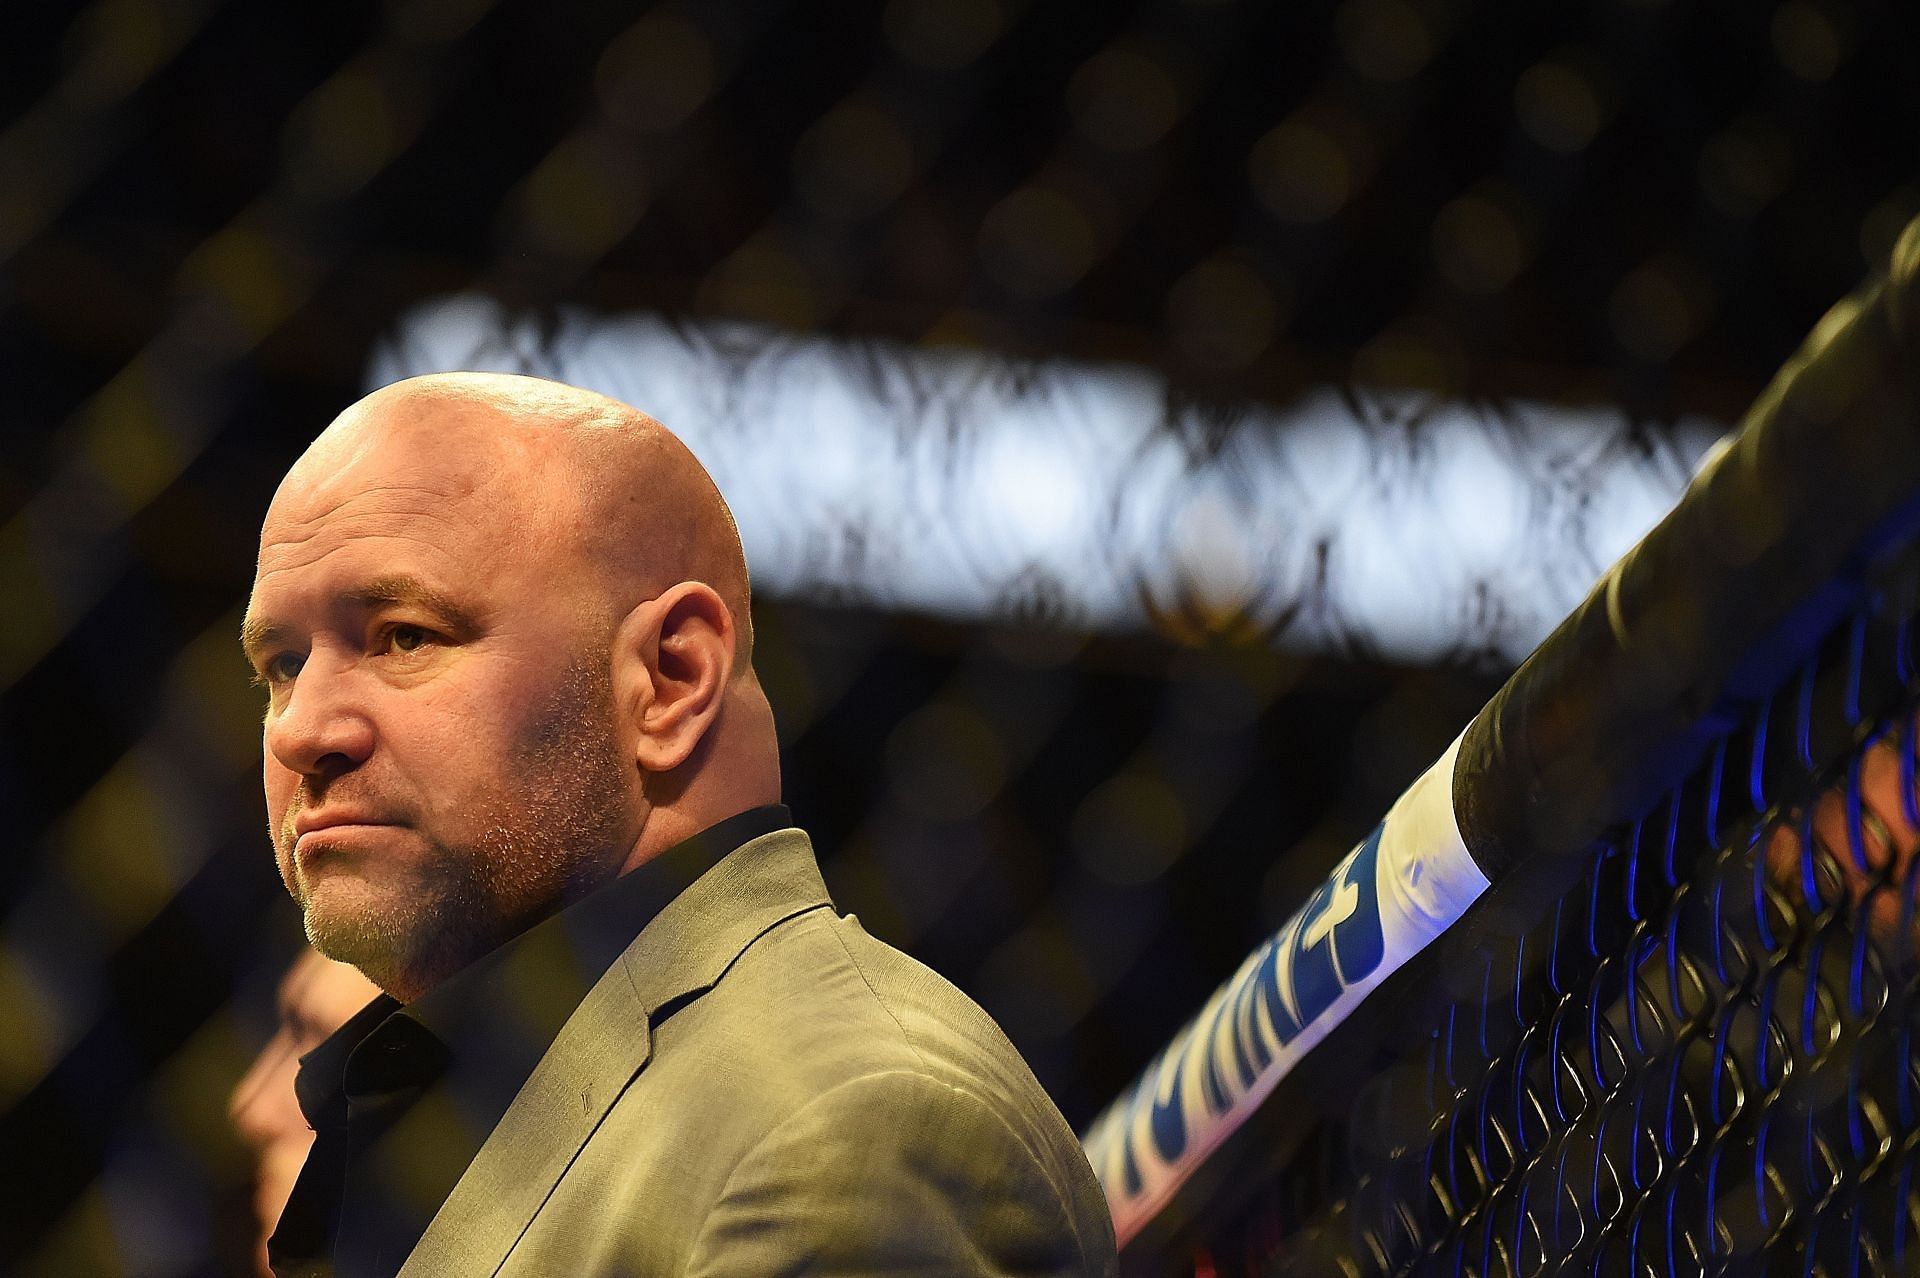 Dana White has yet again been criticized by fans for his rigid stance on fighter pay